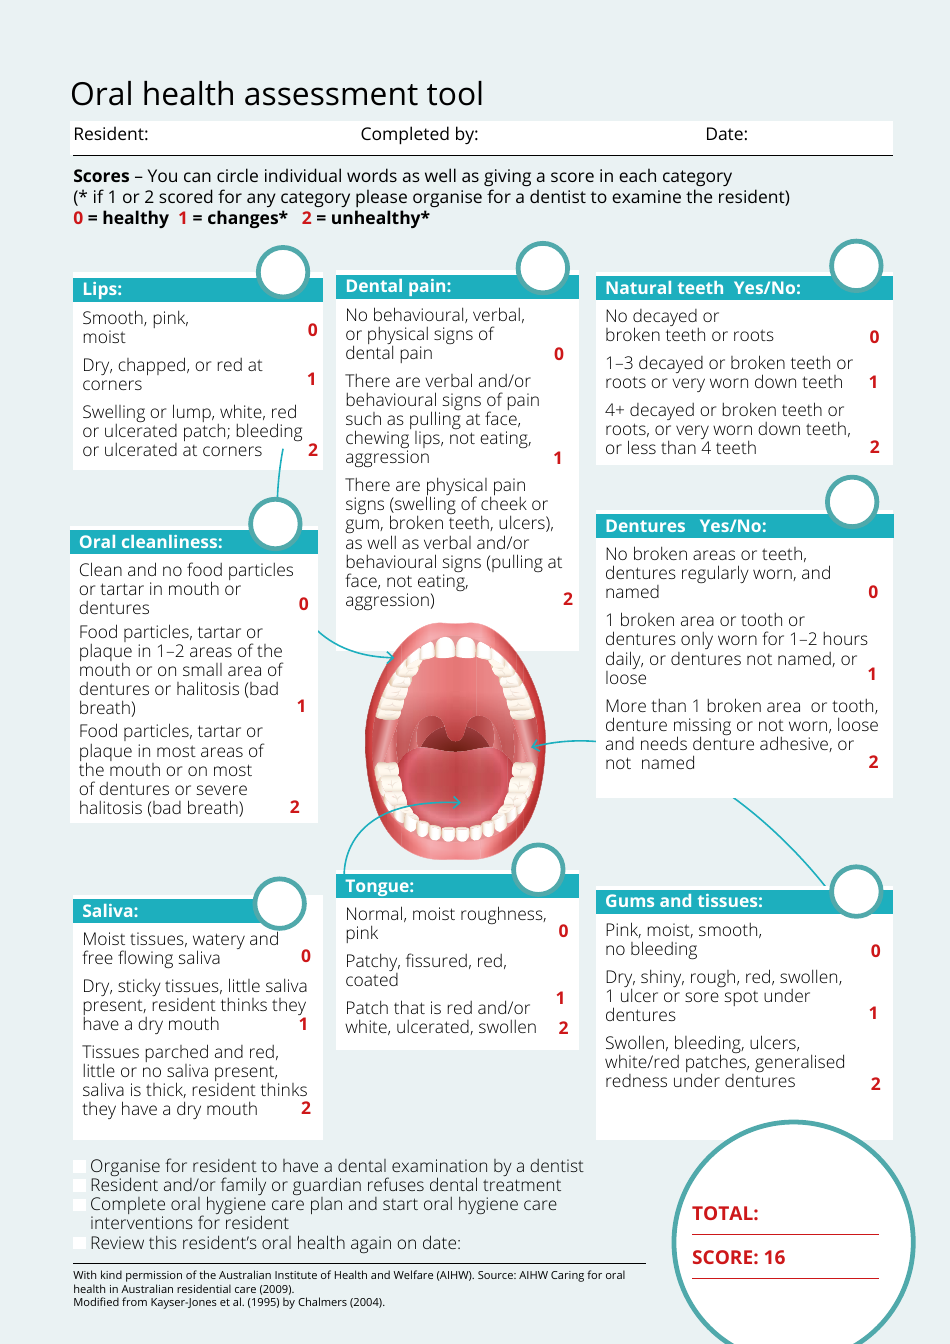 Oral Health Assessment Tool - Preview